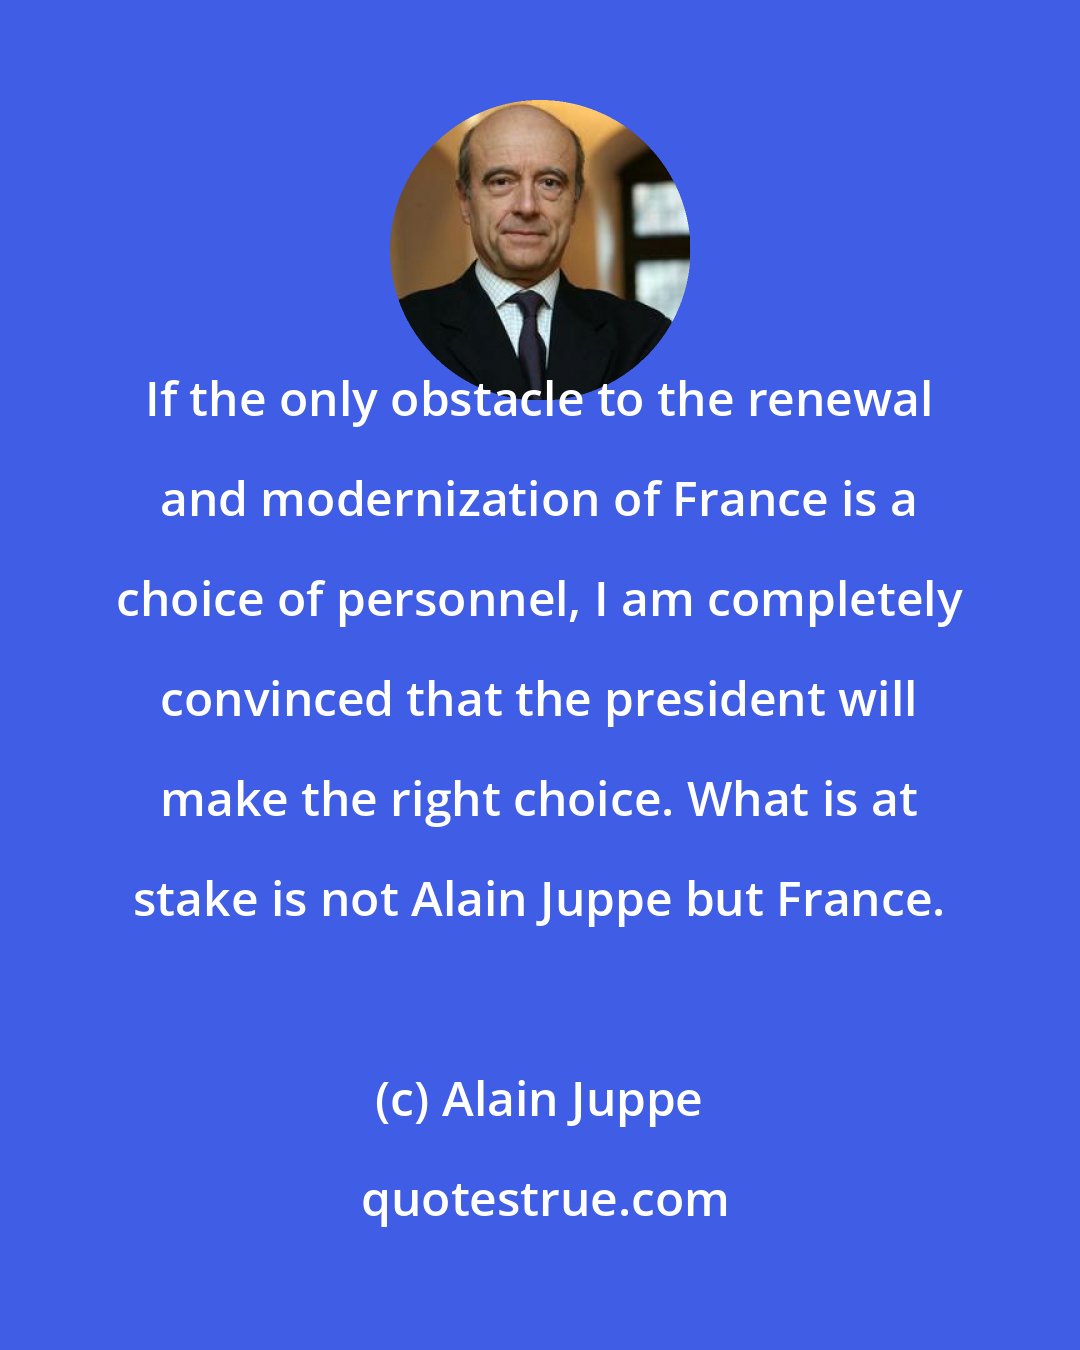 Alain Juppe: If the only obstacle to the renewal and modernization of France is a choice of personnel, I am completely convinced that the president will make the right choice. What is at stake is not Alain Juppe but France.